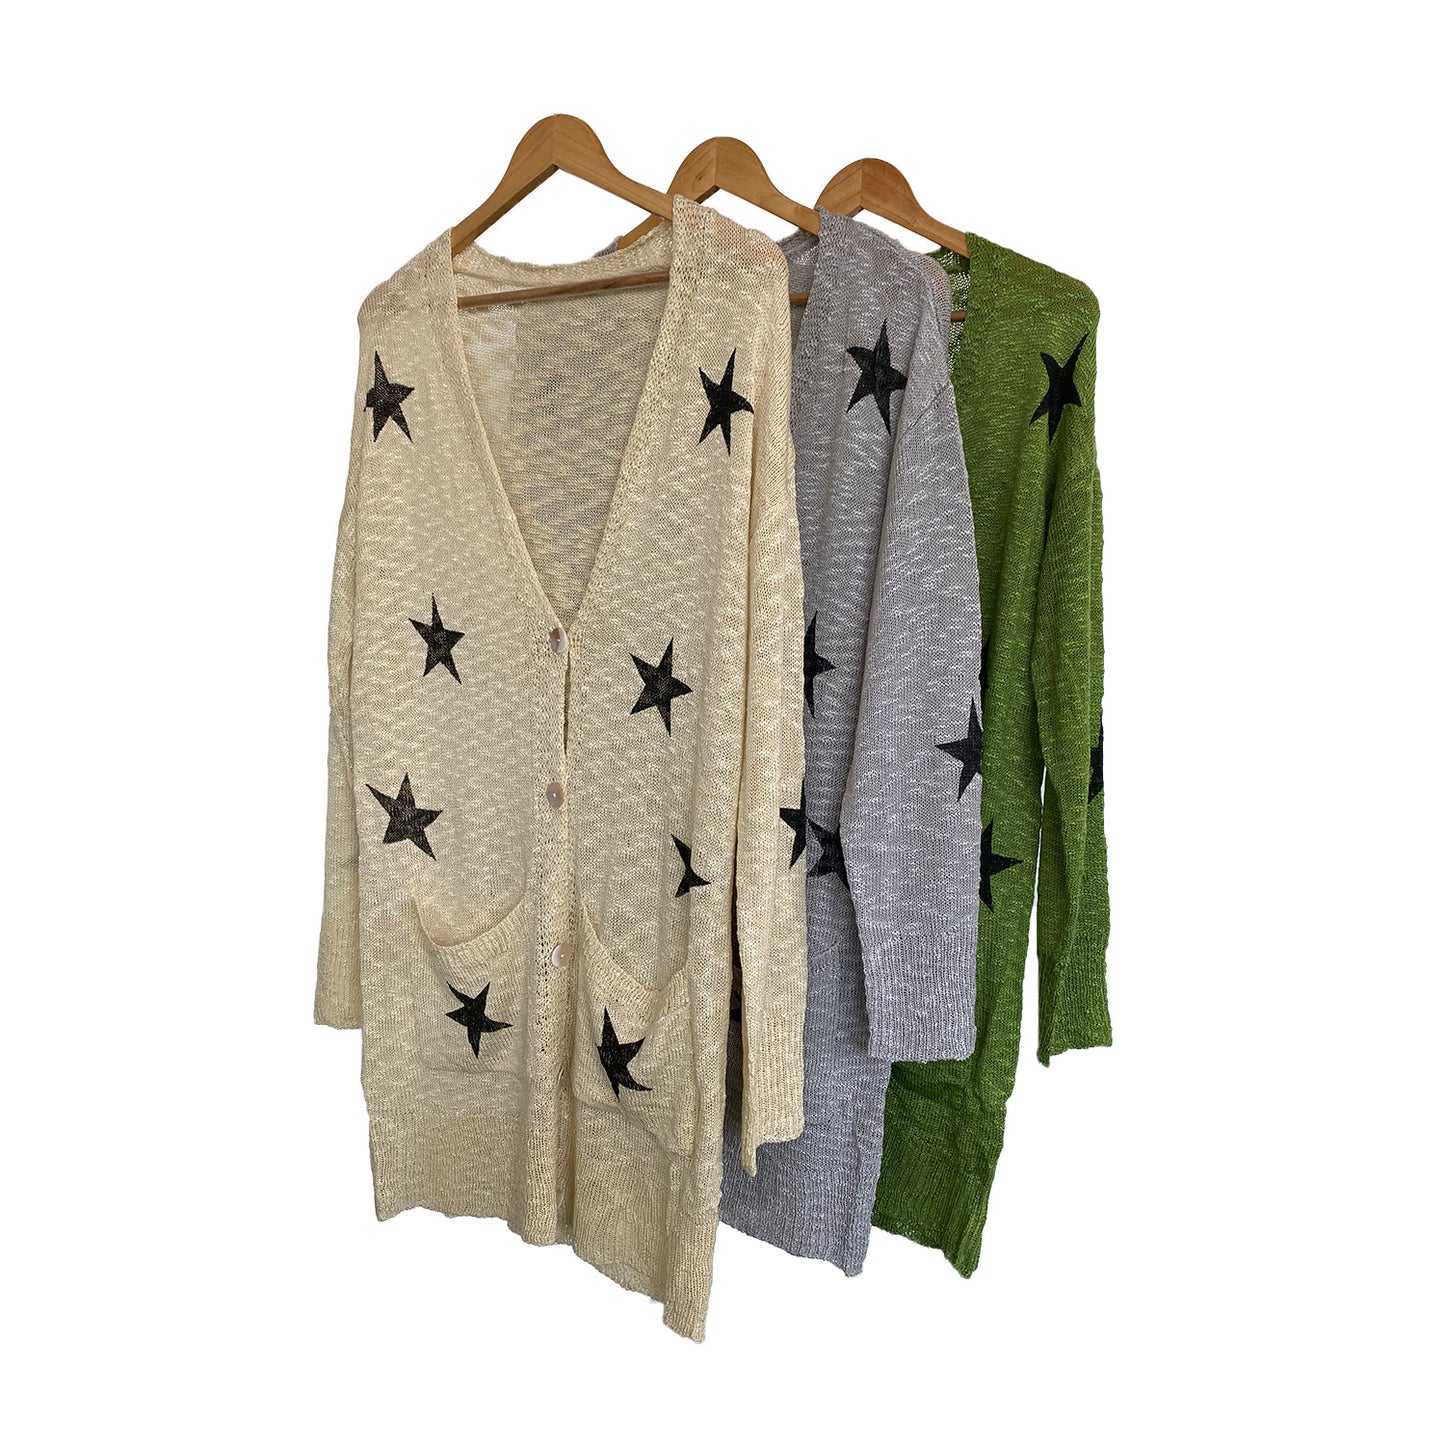 Long star knitted sweater